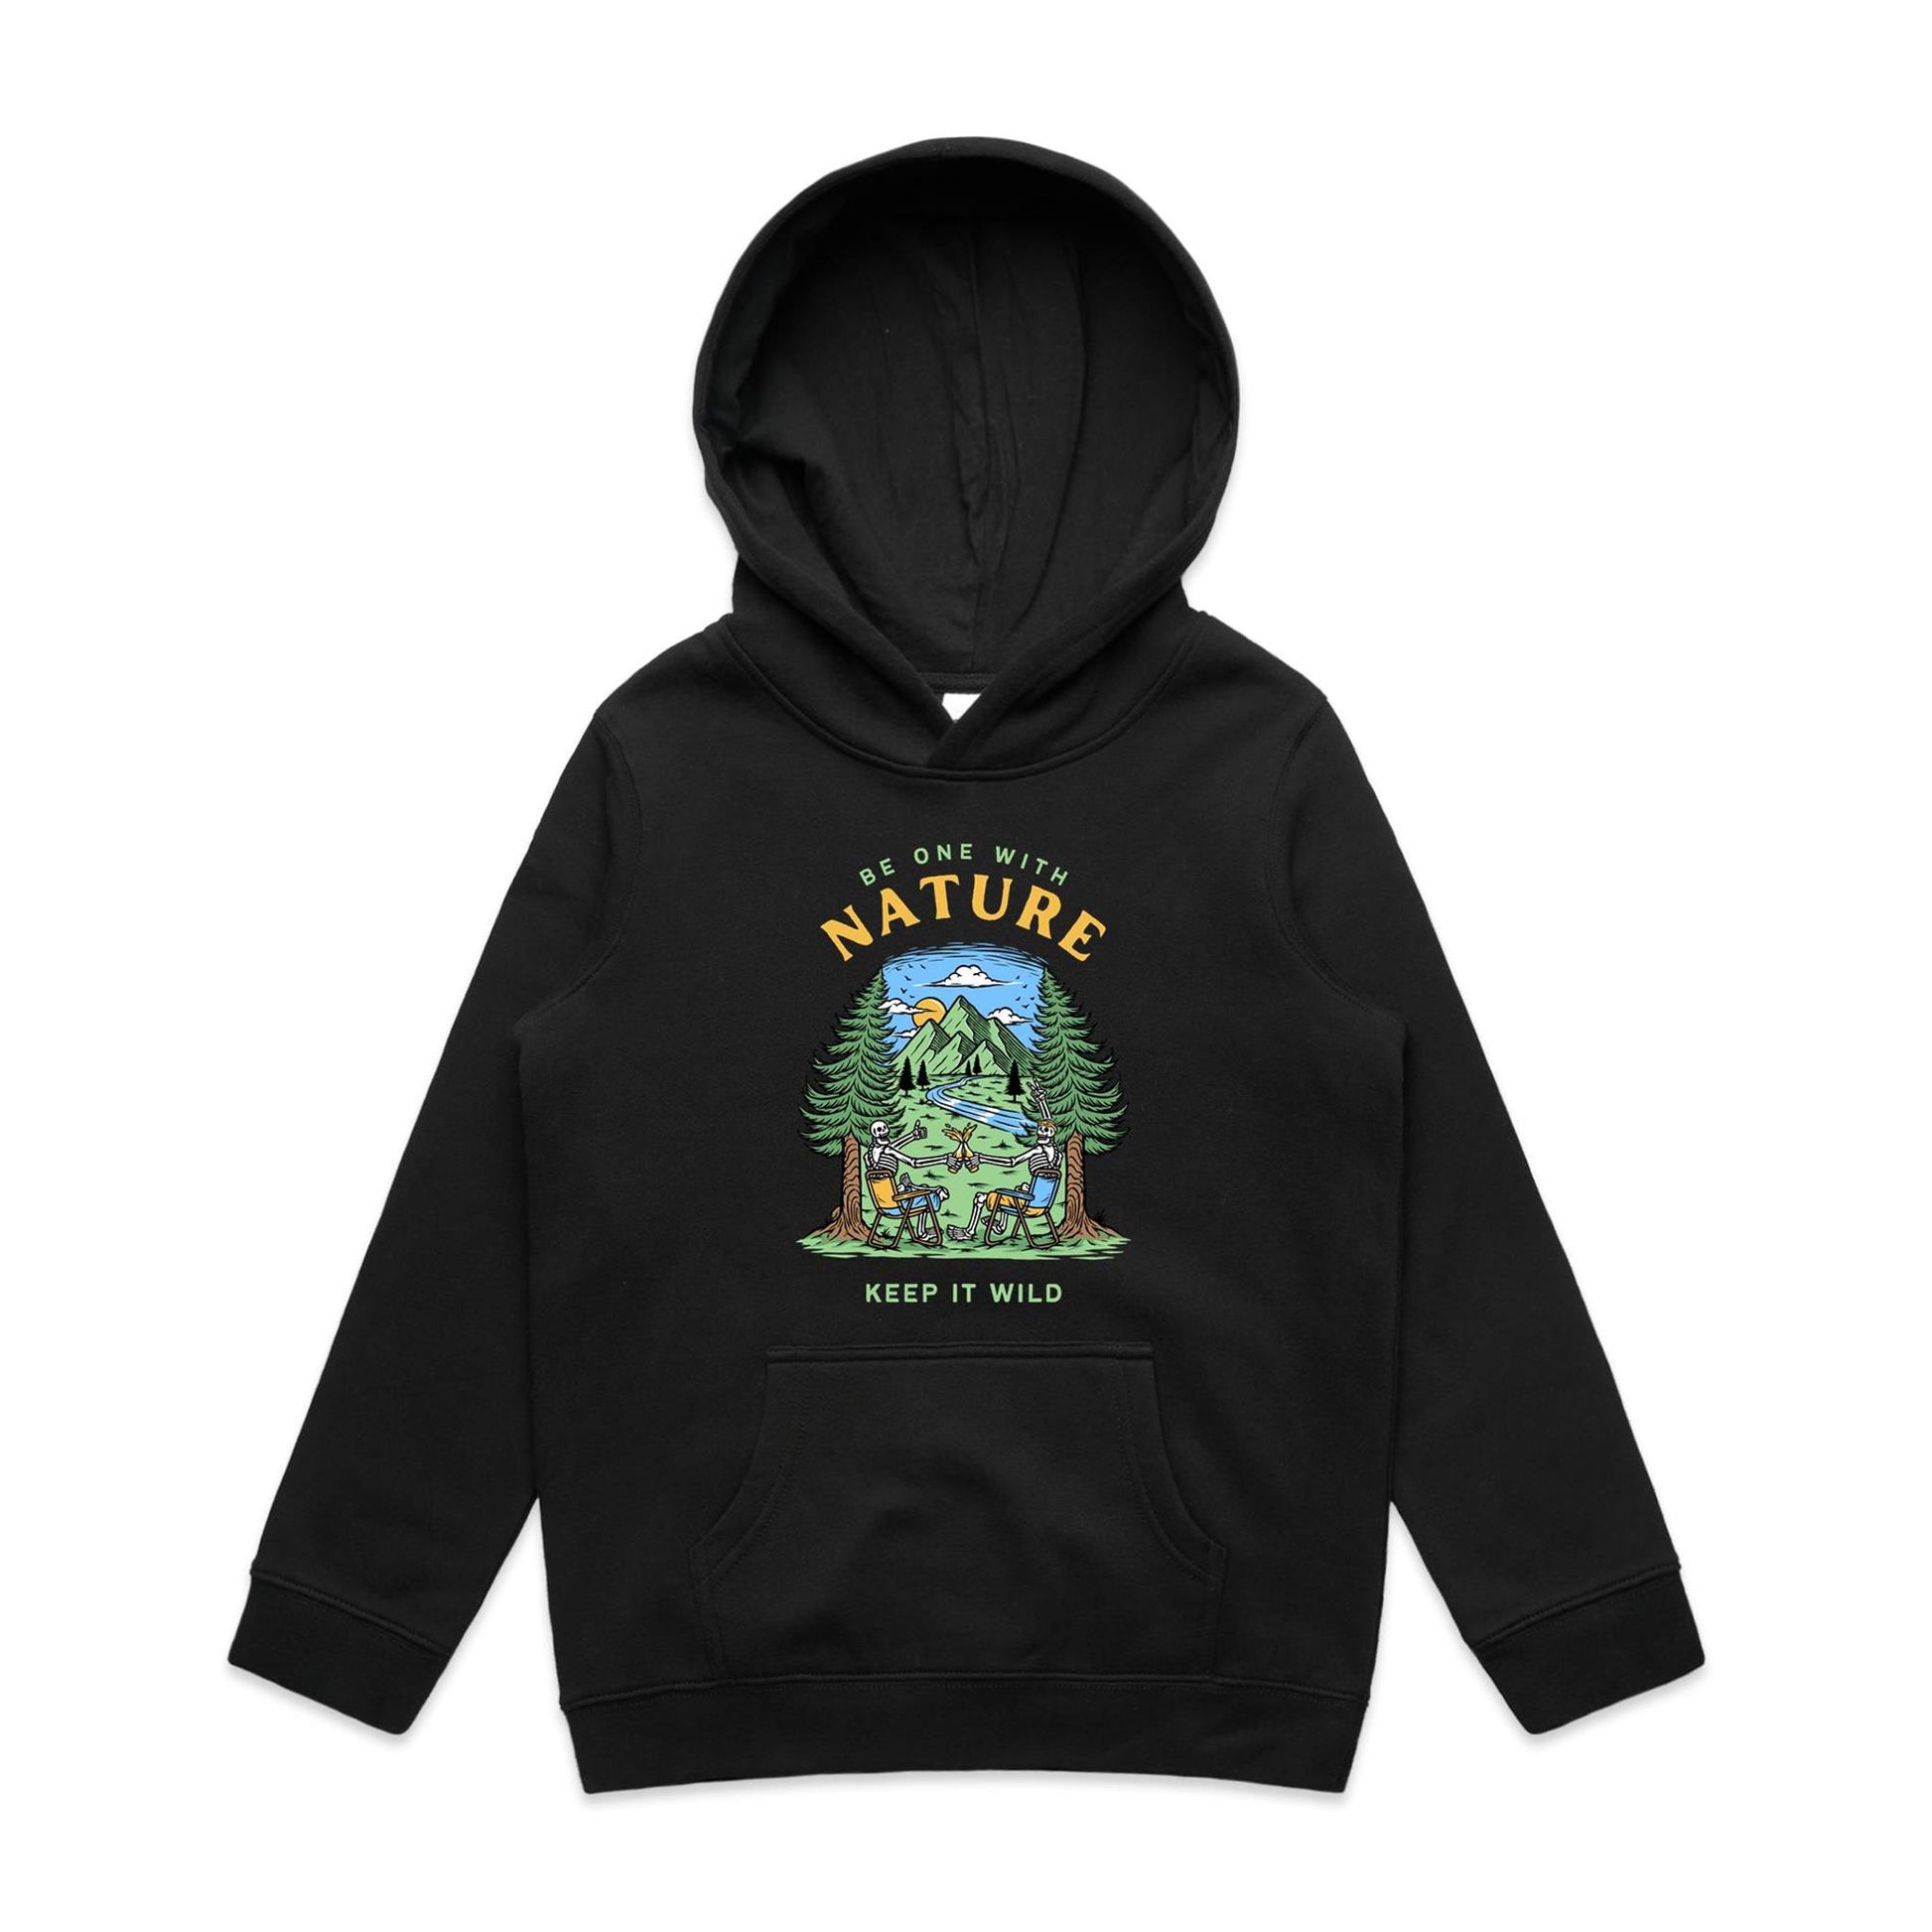 Be One With Nature, Skeleton - Youth Supply Hood Black Kids Hoodie Environment Summer